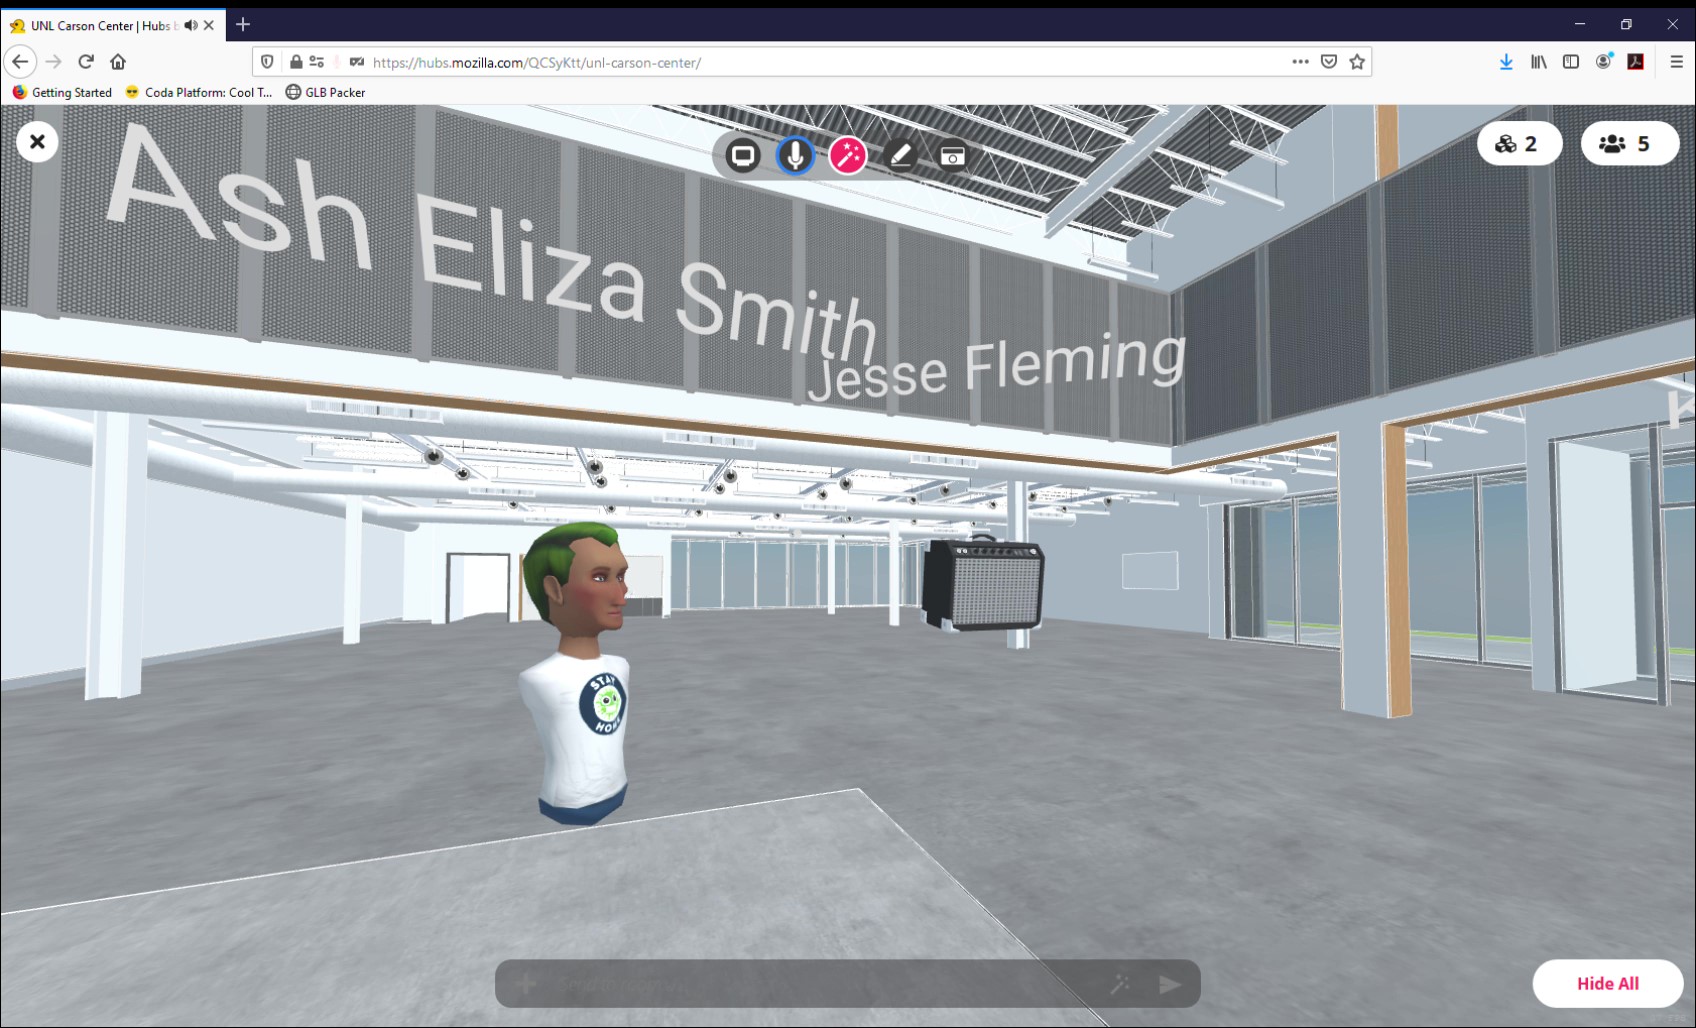  Professors of Emerging Media Arts Ash Eliza Smith and Jesse Fleming meet inside the virtual Carson Center in Mozilla Hubs.